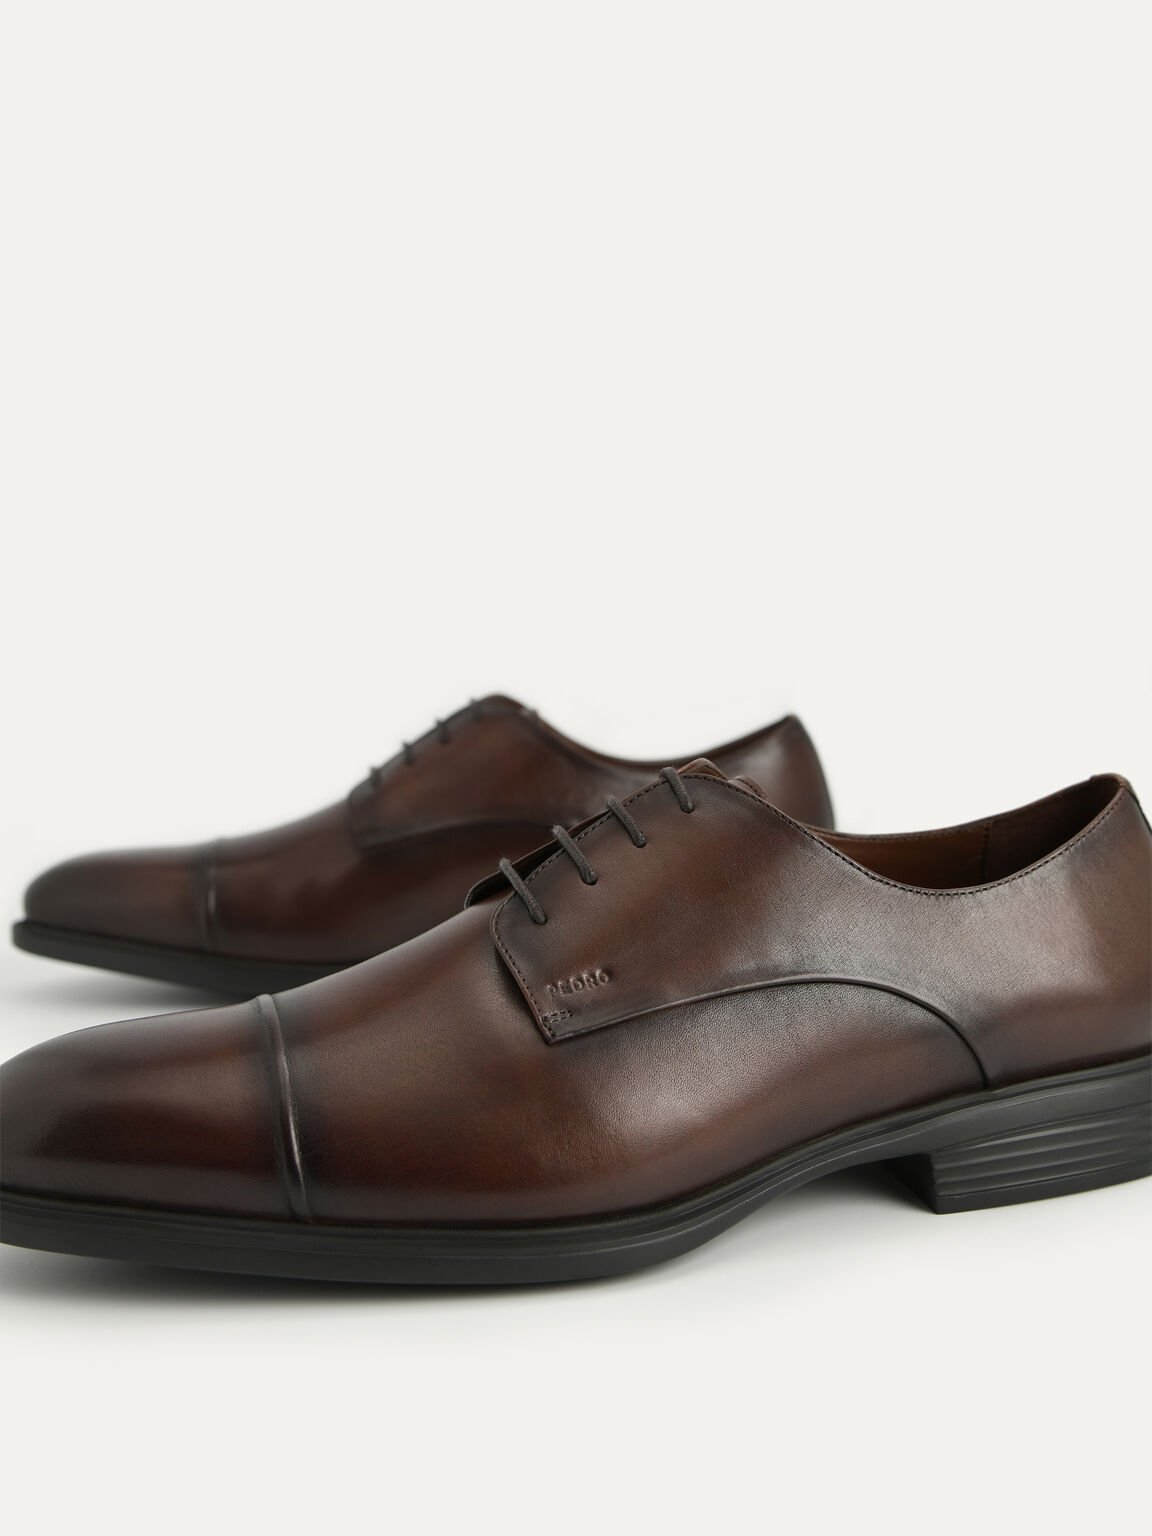 Altitude Leather Toe Derby Shoes, Brown